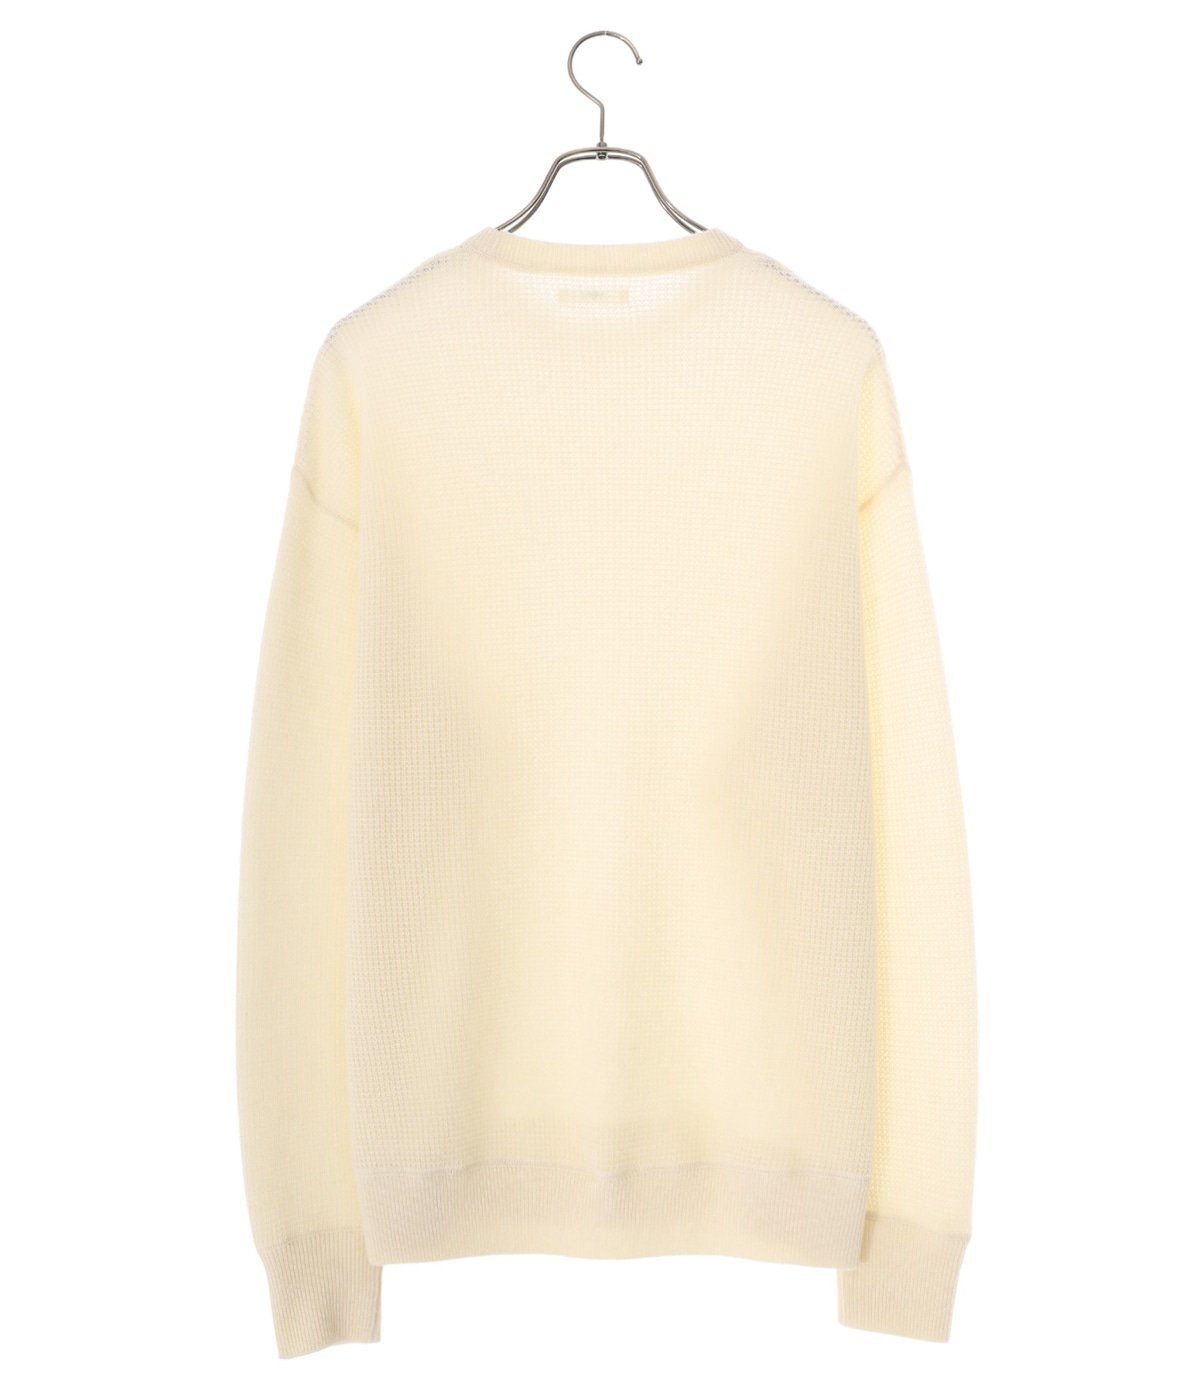 CASHMERE COMFORT WAFFLE THERMAL | BODHI(ボーディ) / トップス 